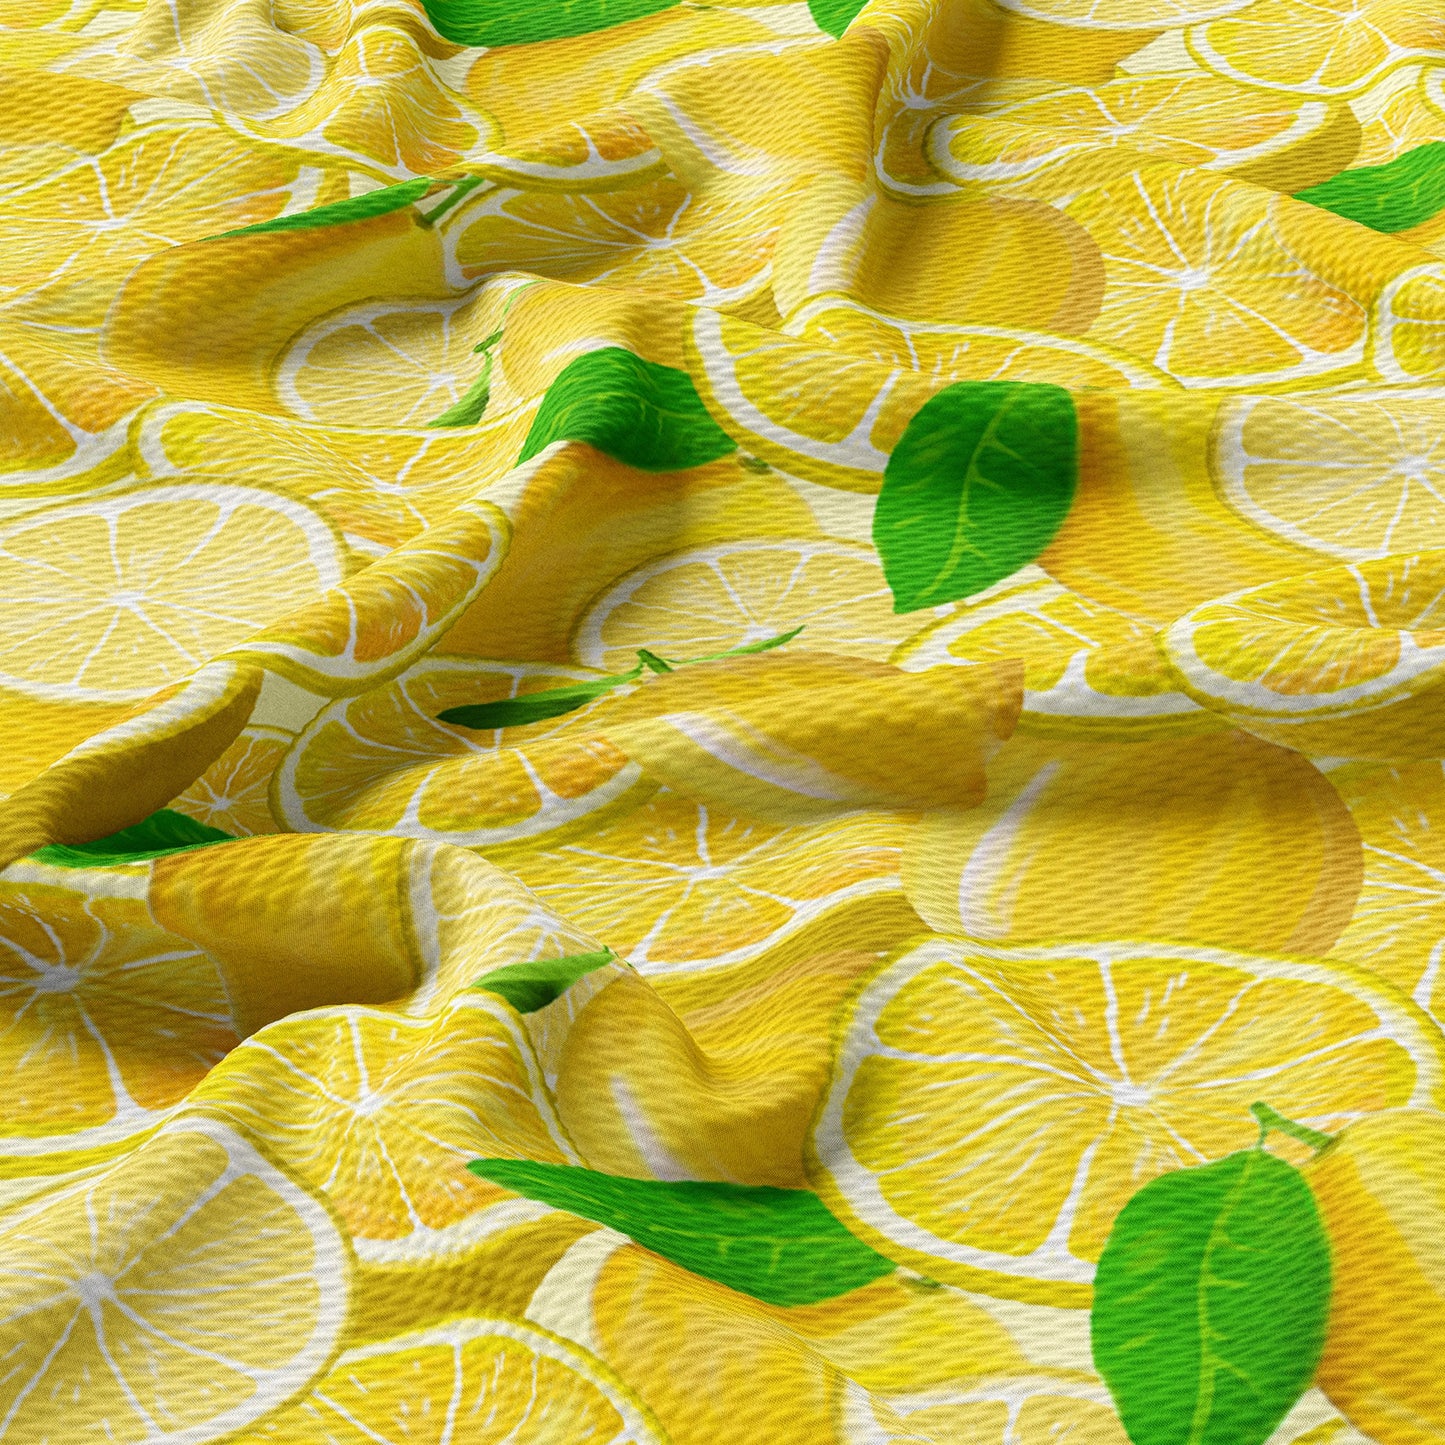 Lemon Printed Liverpool Bullet Textured Fabric by the yard 4 Way Stretch Solid Strip Thick Liverpool Fabric  (Lemon4)